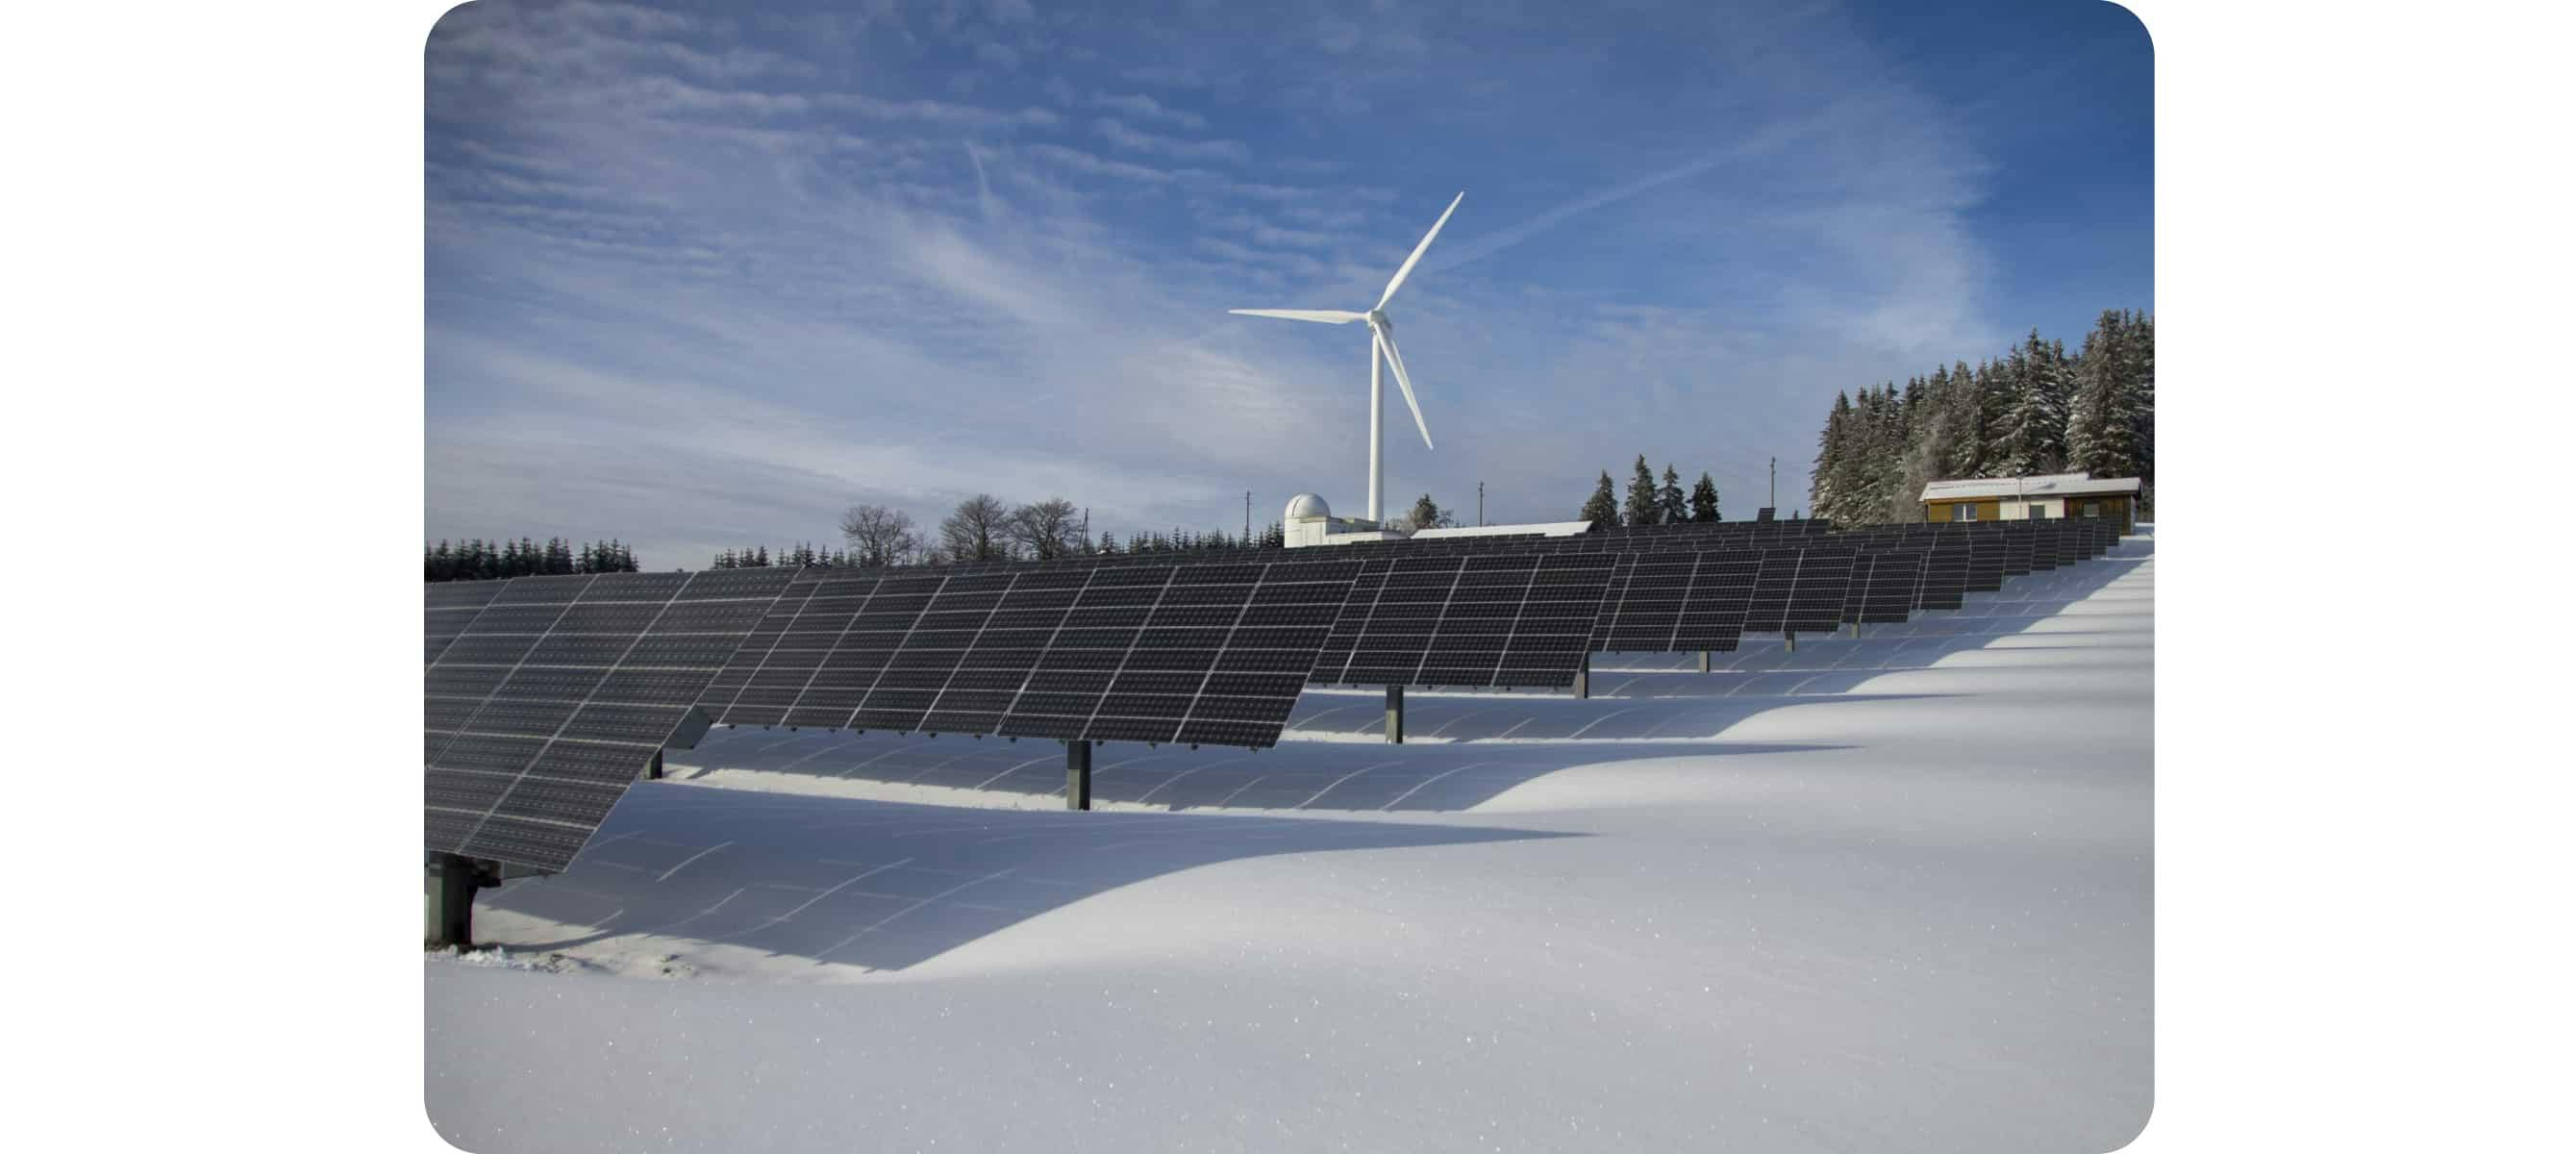 Solar panels on snow with windmill under clear day sky